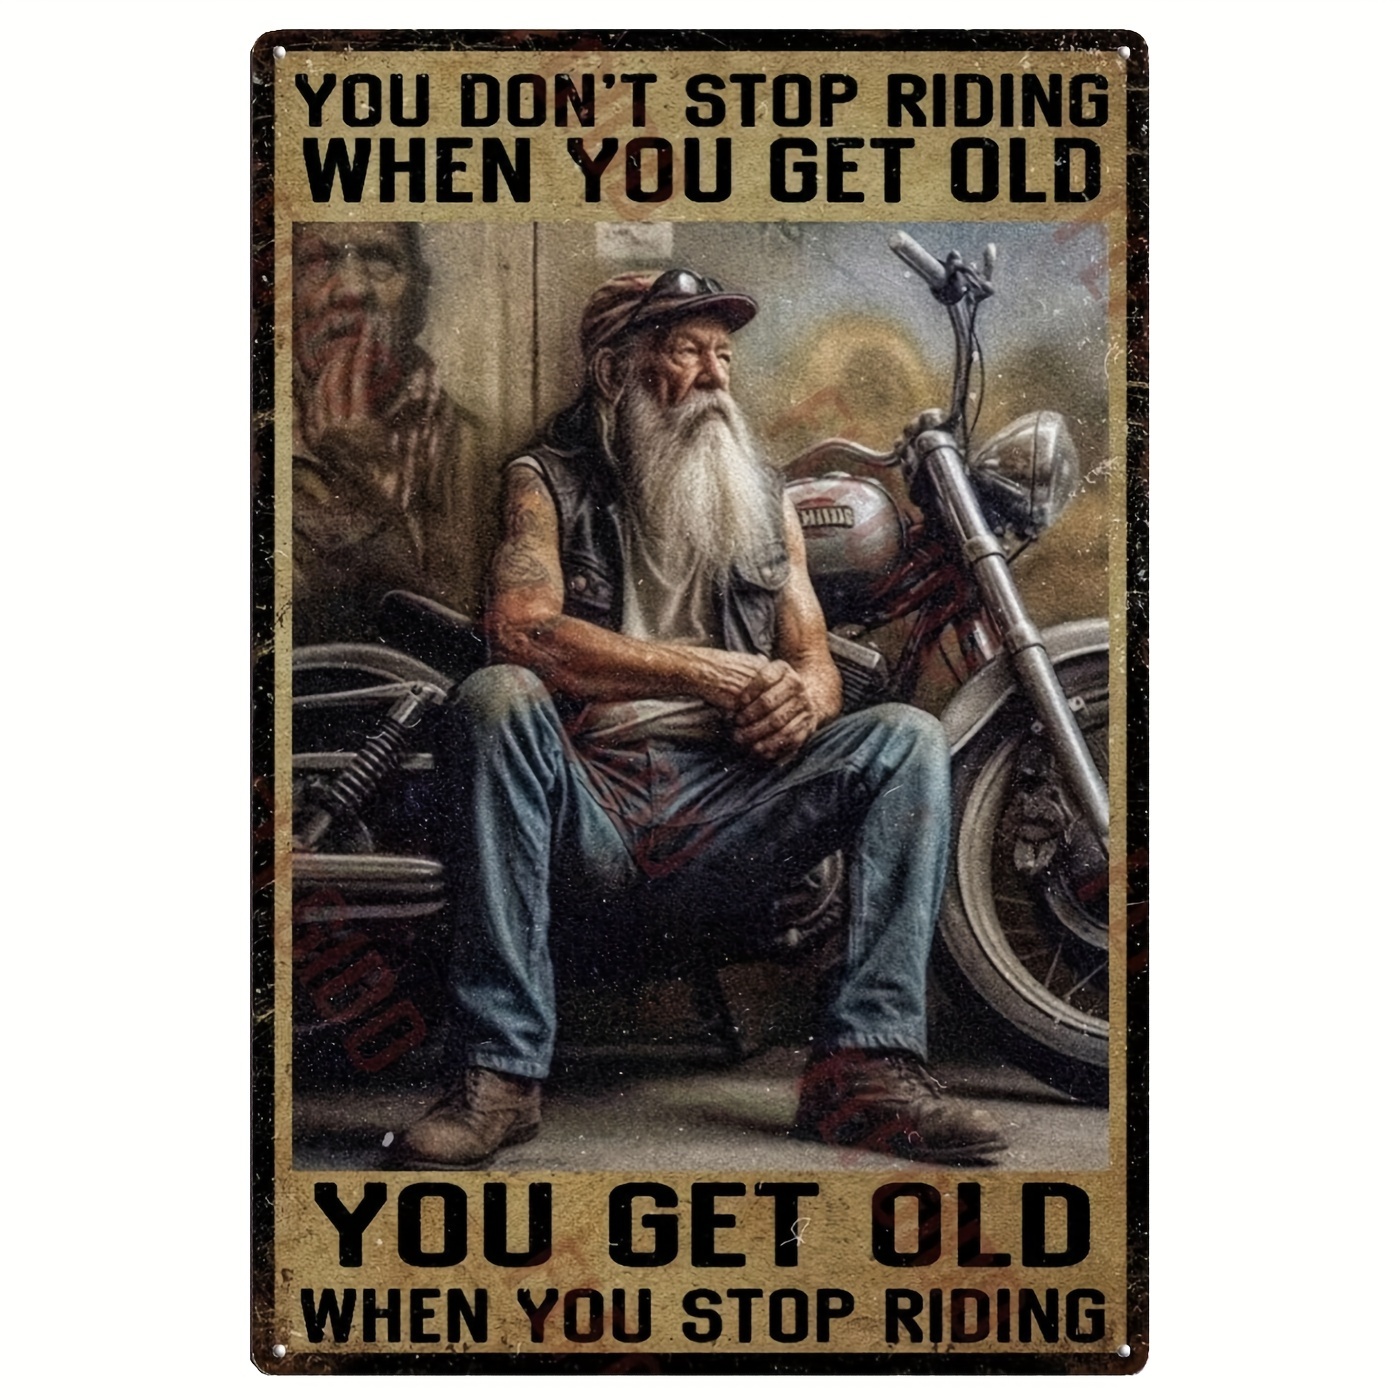 

Metal Tin Sign Motorcycle You Don't Stop Racing When You Get Old Tin Sign For Home Living Room Kitchen Cafe Bar Wall Decor 8x12inch